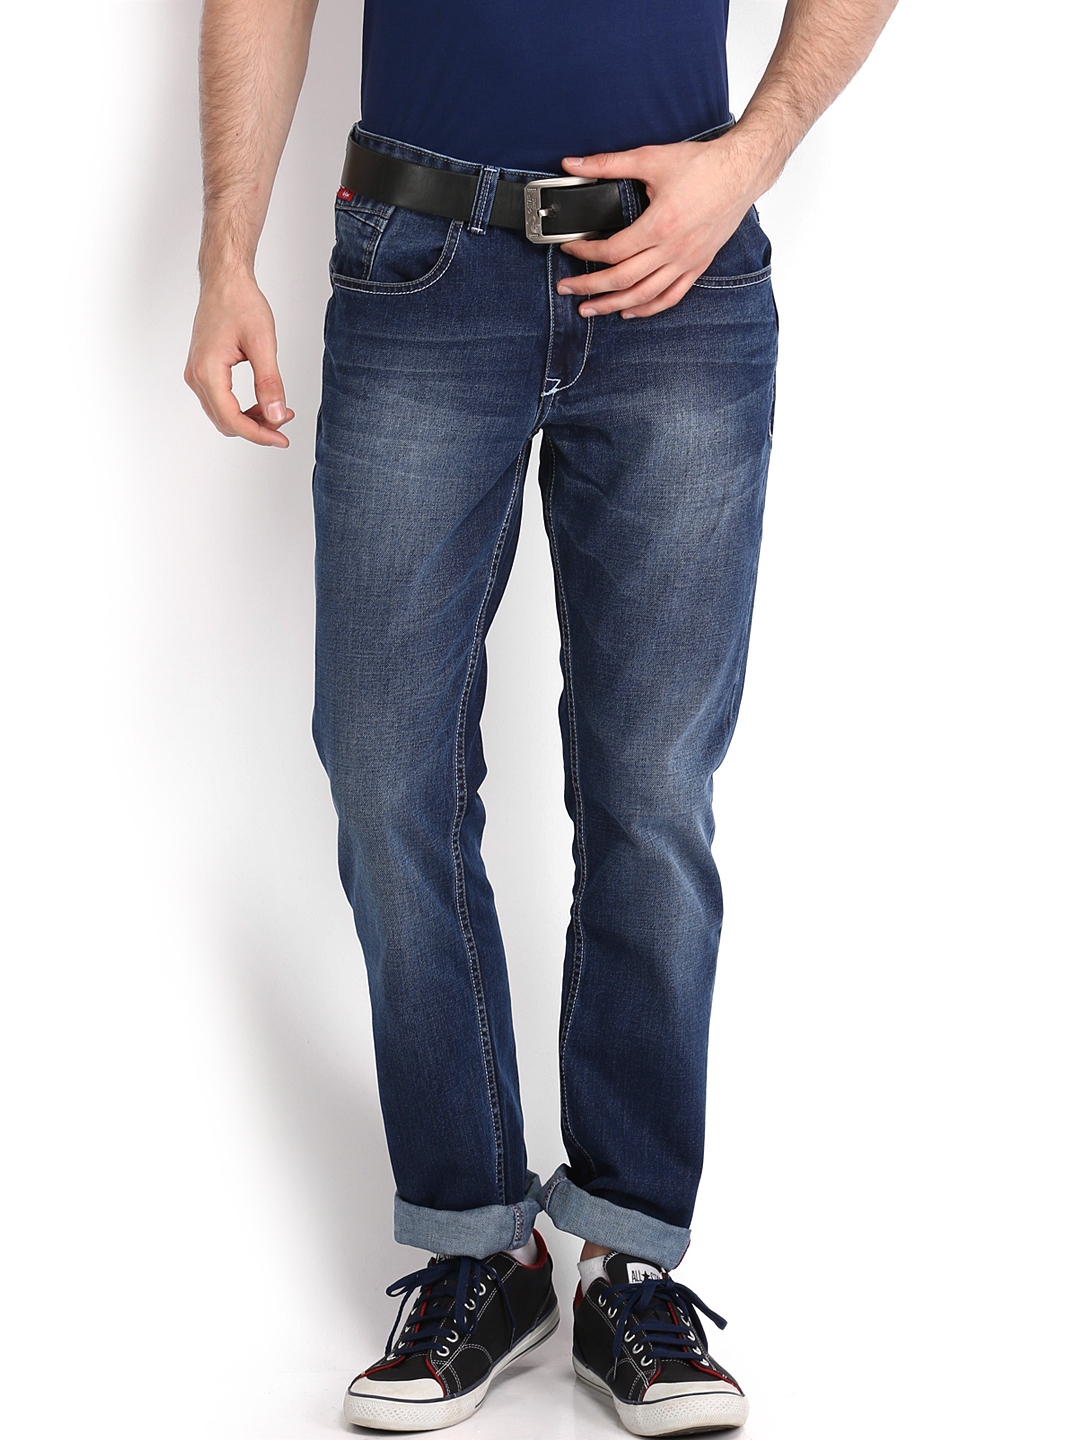 livergy jeans modern straight fit